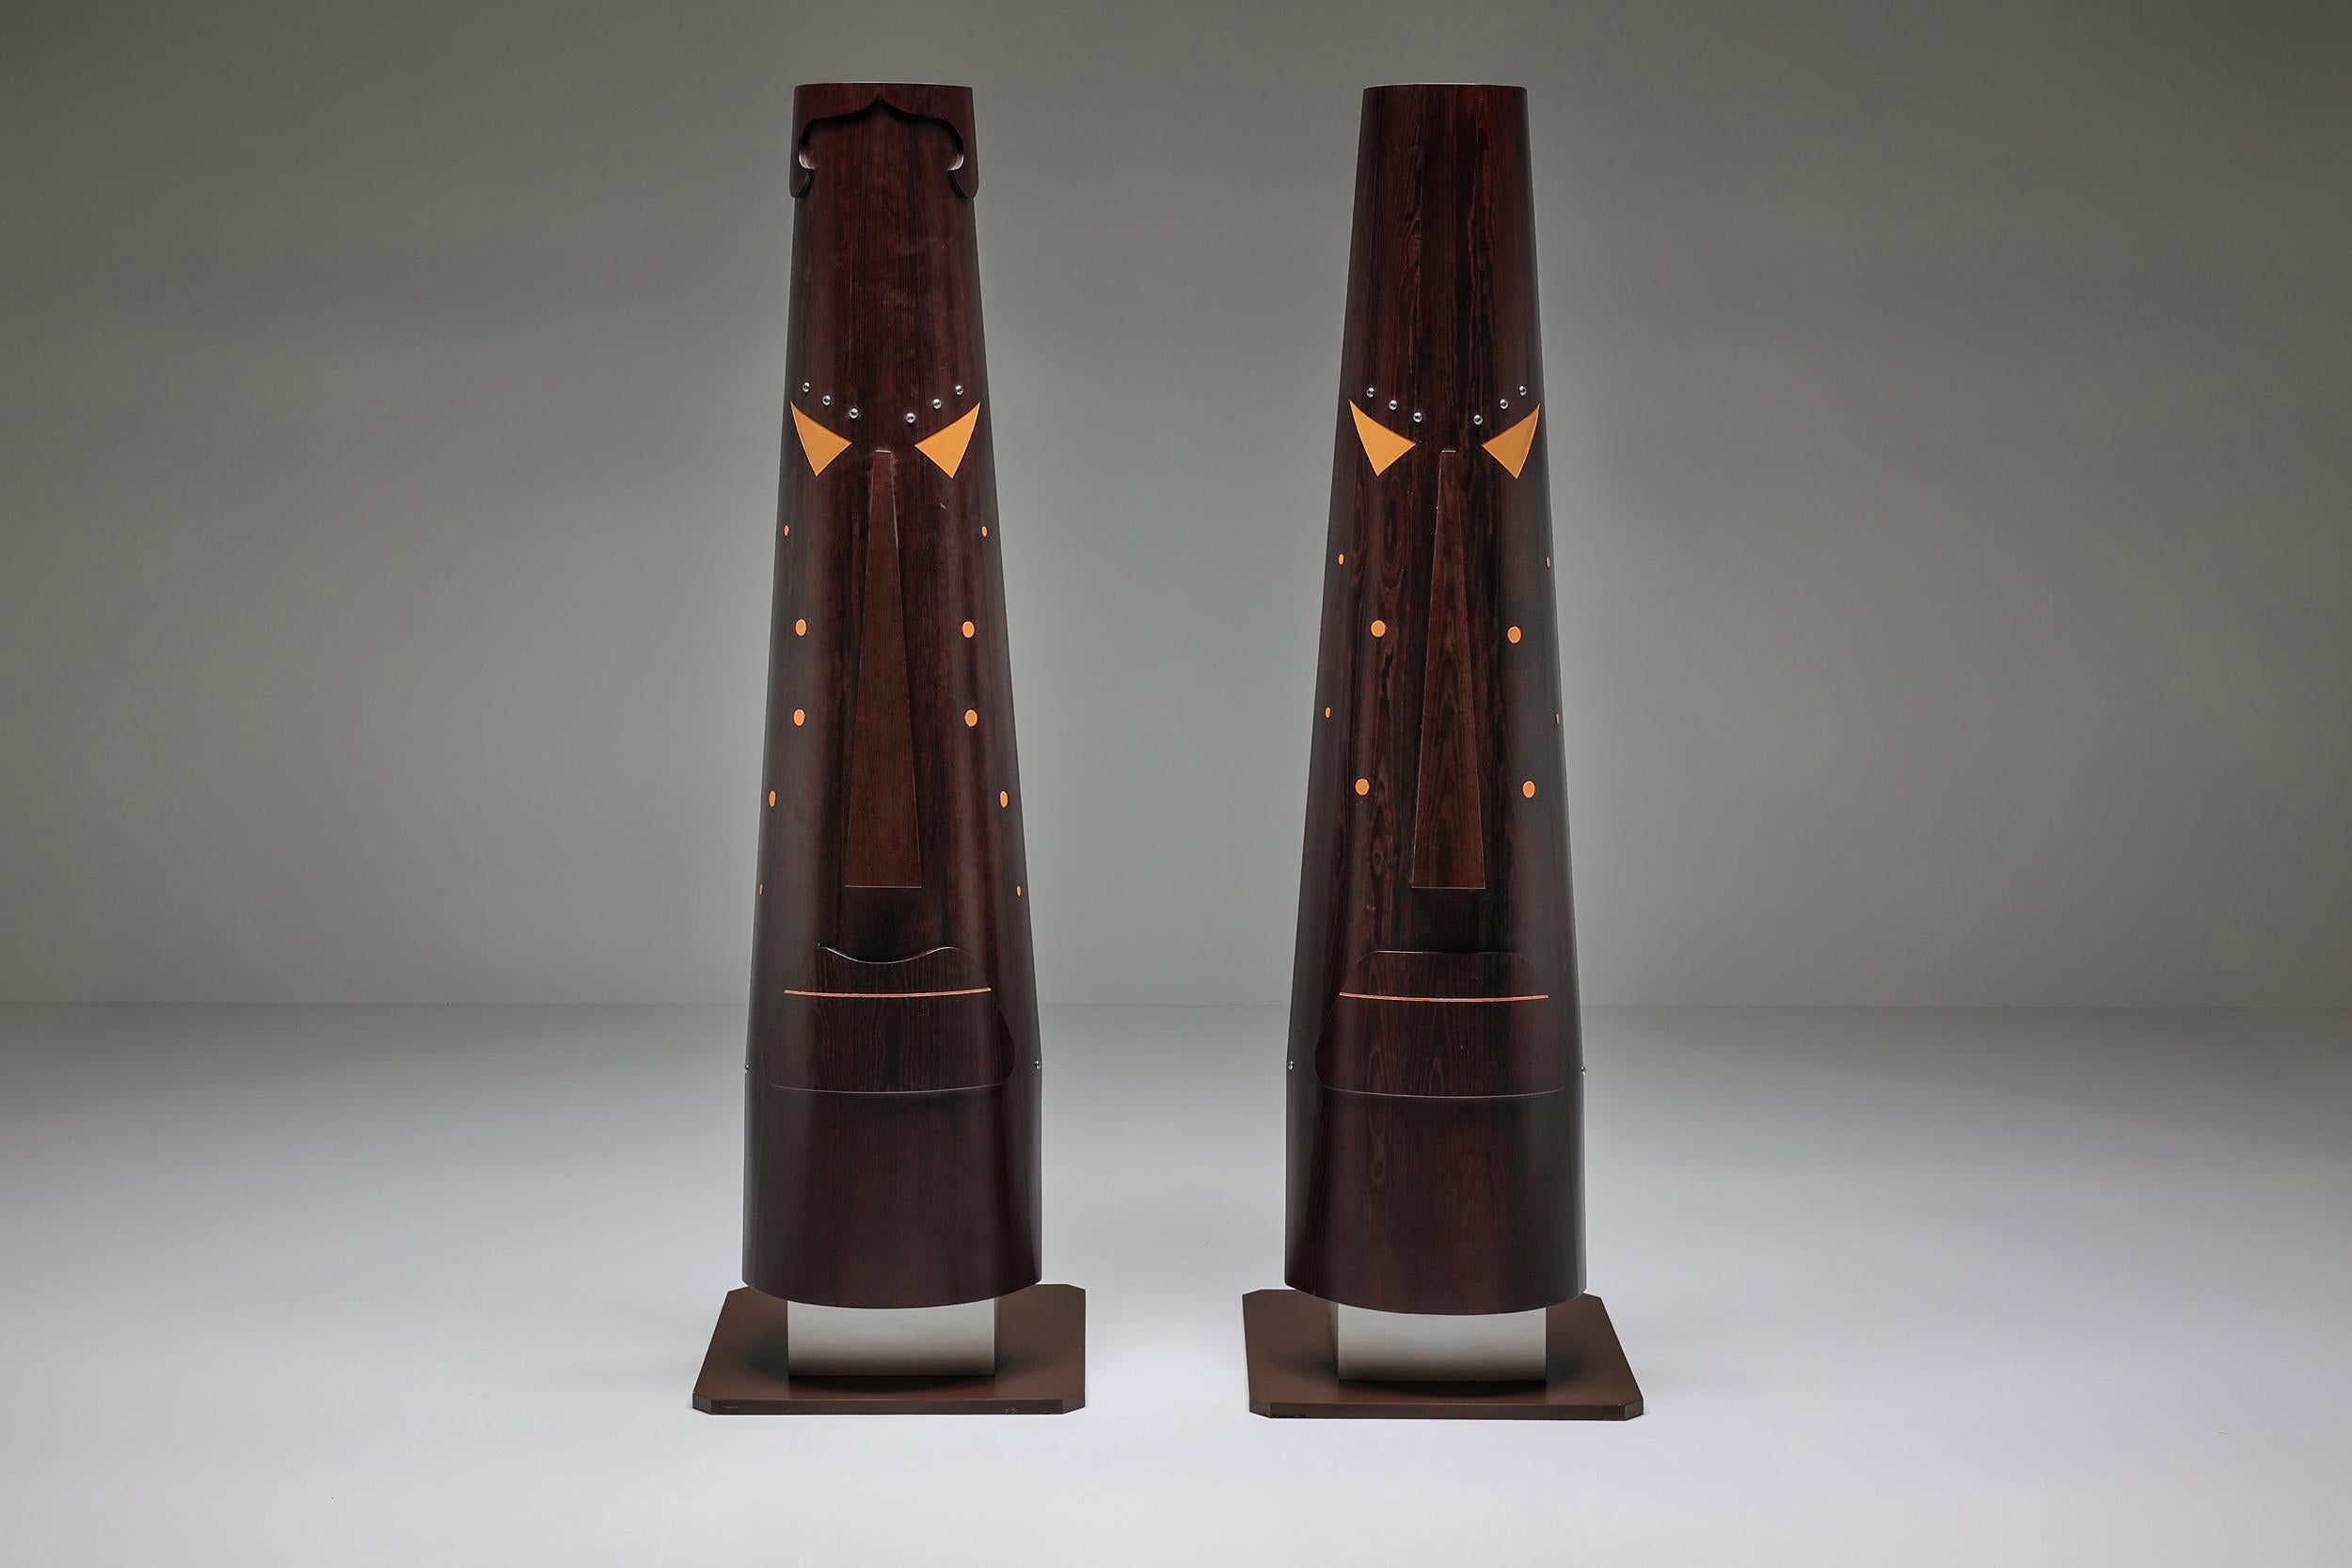 Mid-Century Modern Abstract TOTEM Sculptures by Bianca Garinei Made in Florence, Italy, 1970's For Sale